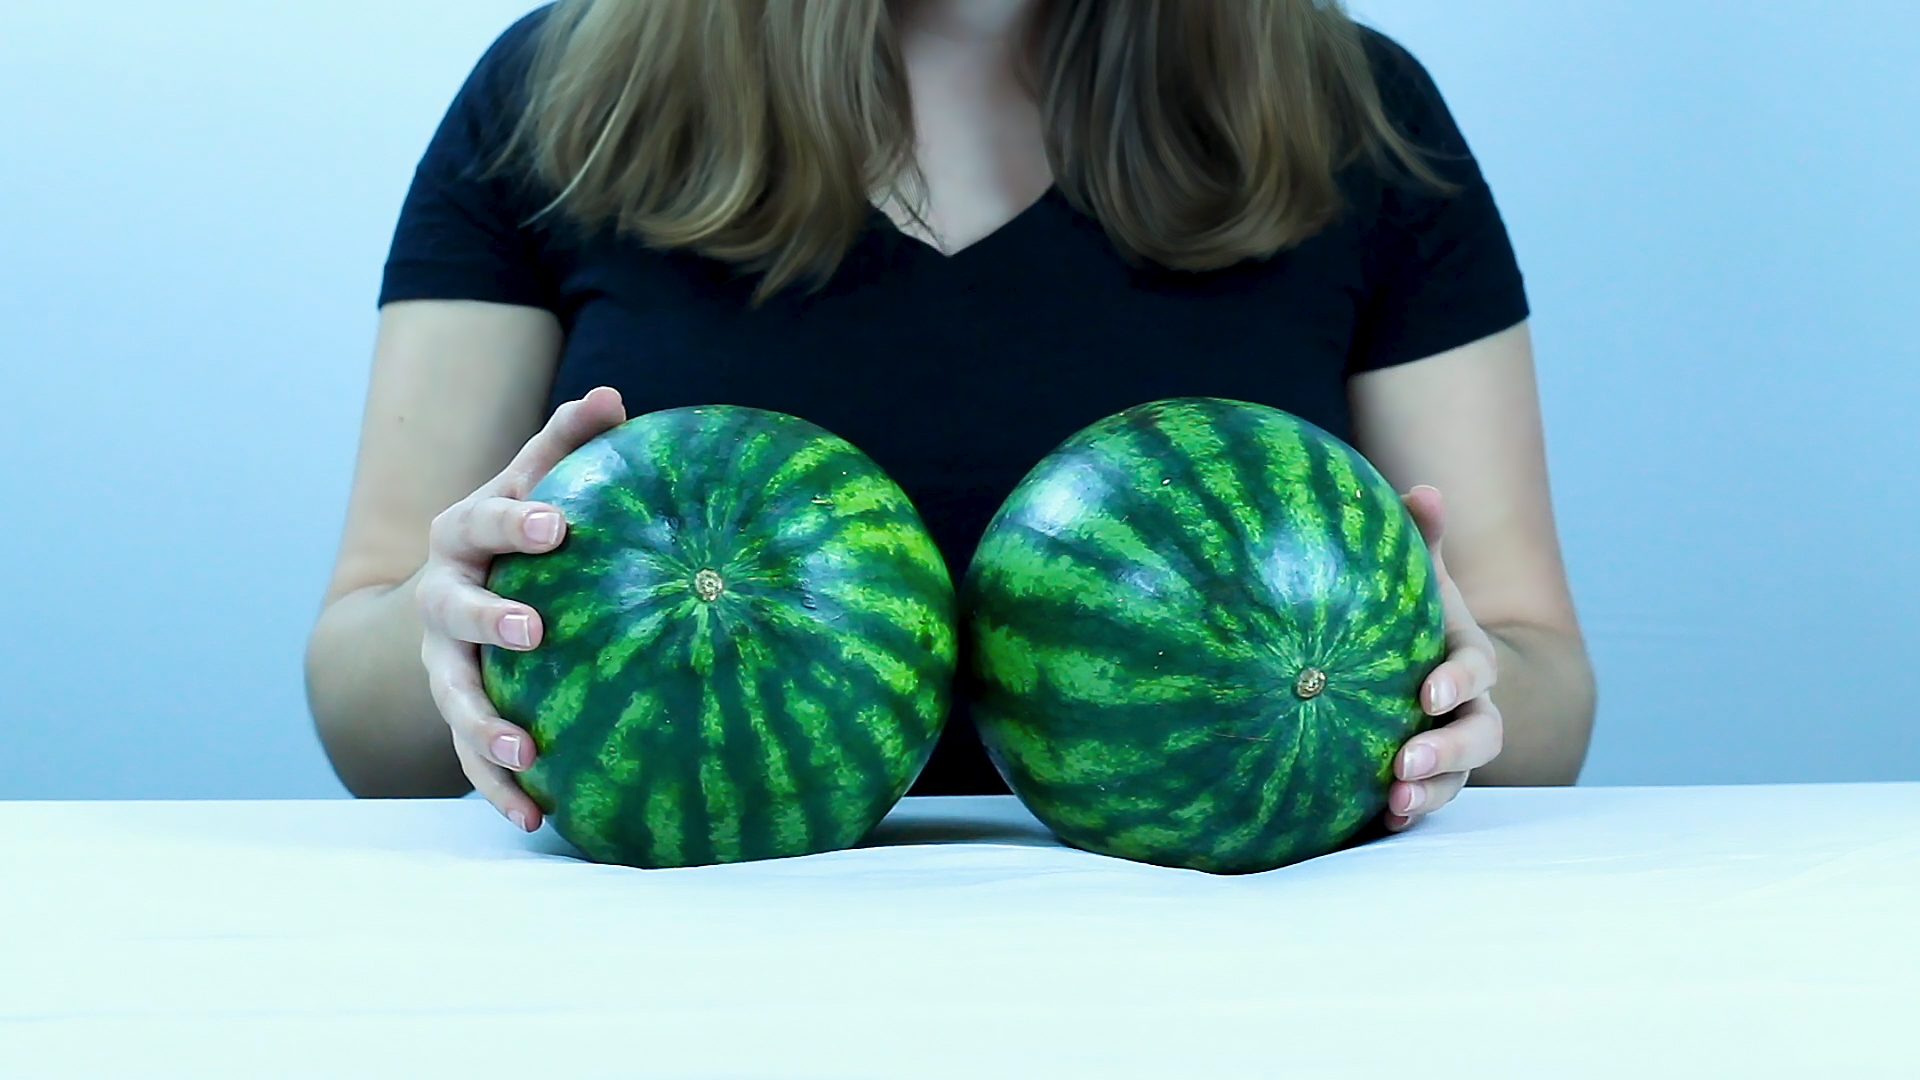 Melons marie